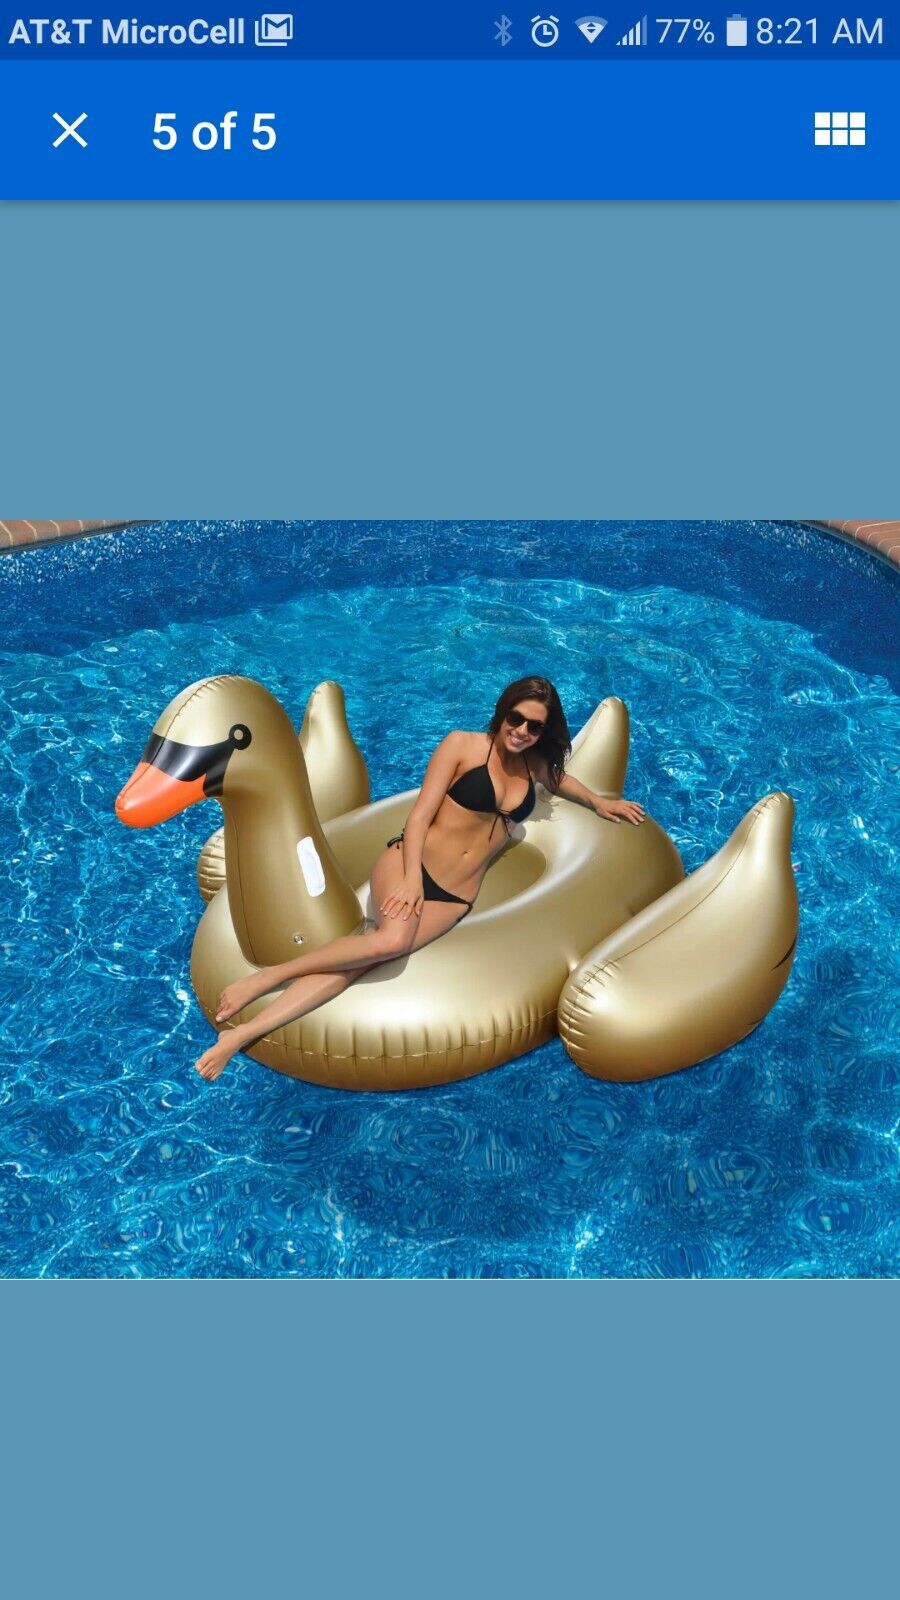 Swimline Golden Swan 75 online shop Inch Max 89% OFF Raft Giant Inflatable Rideable PVC